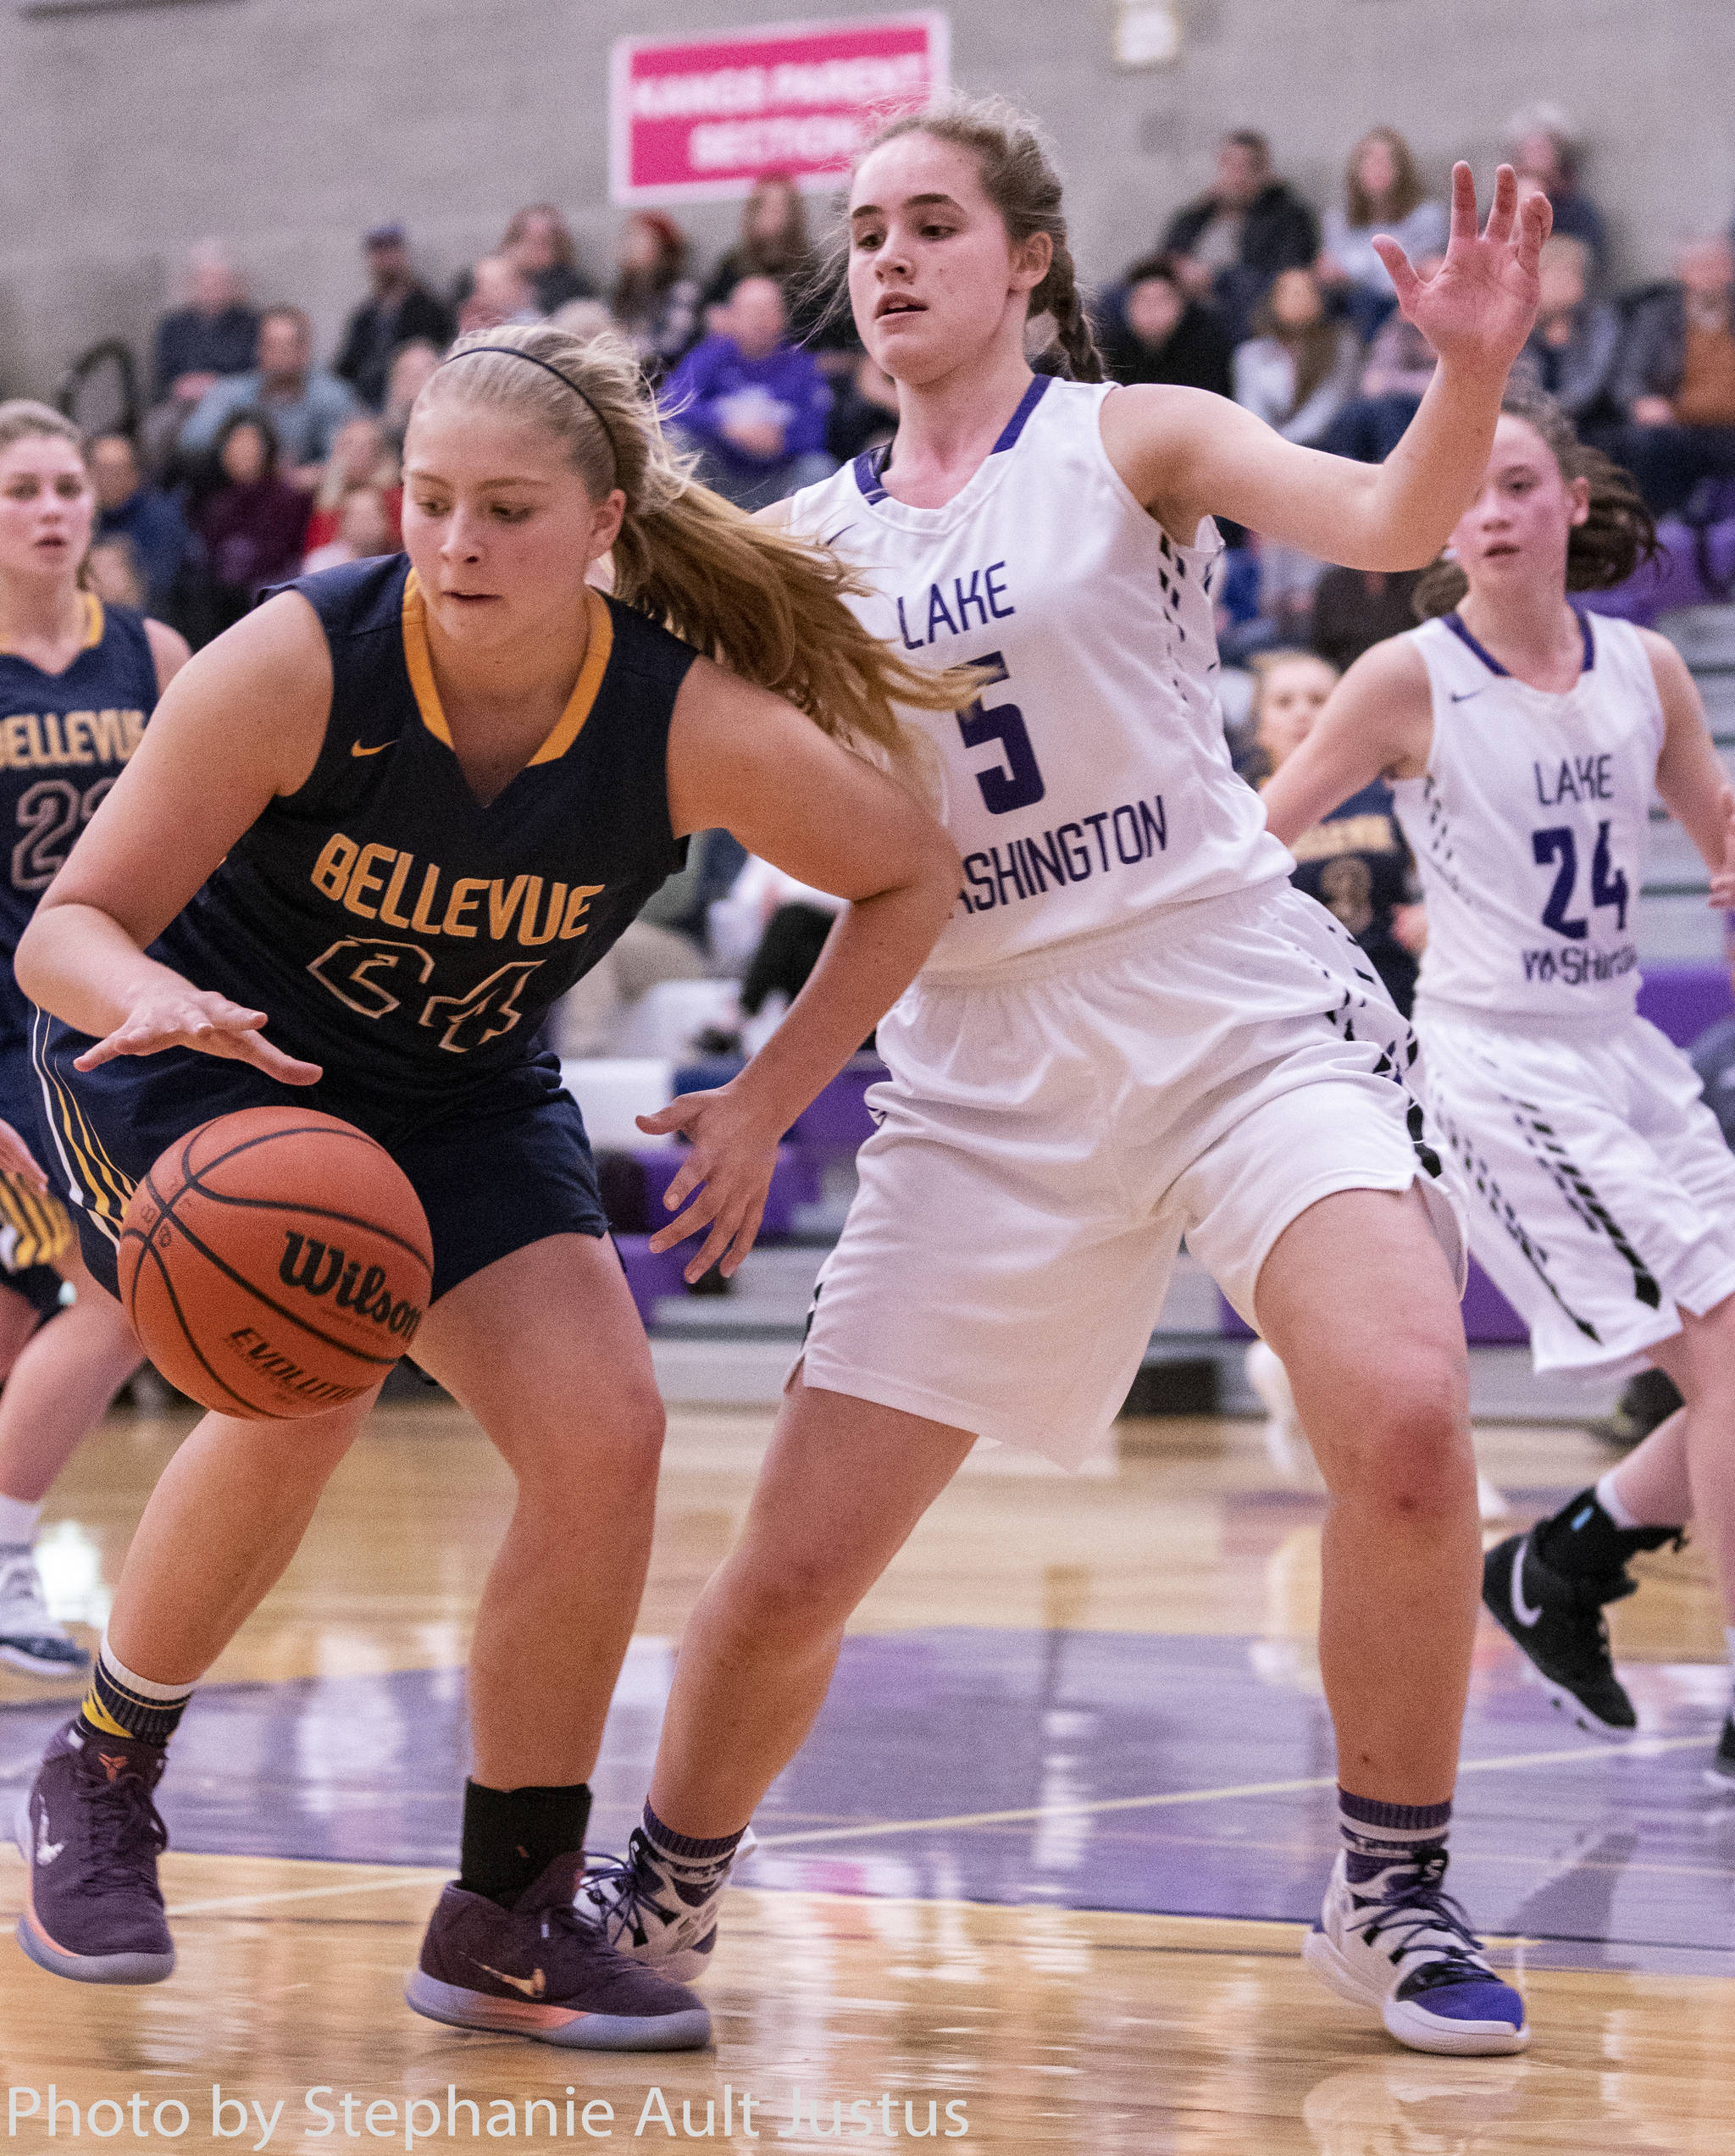 Bellevue Wolverines senior team captain Ali Jochums, left, gains possession of the ball in the paint while being covered by Lake Washington sophomore forward Brooke Filan. Lake Washington defeated Bellevue 57-37 on Jan. 23 in Kirkland. Photo courtesy of Stephanie Ault Justus